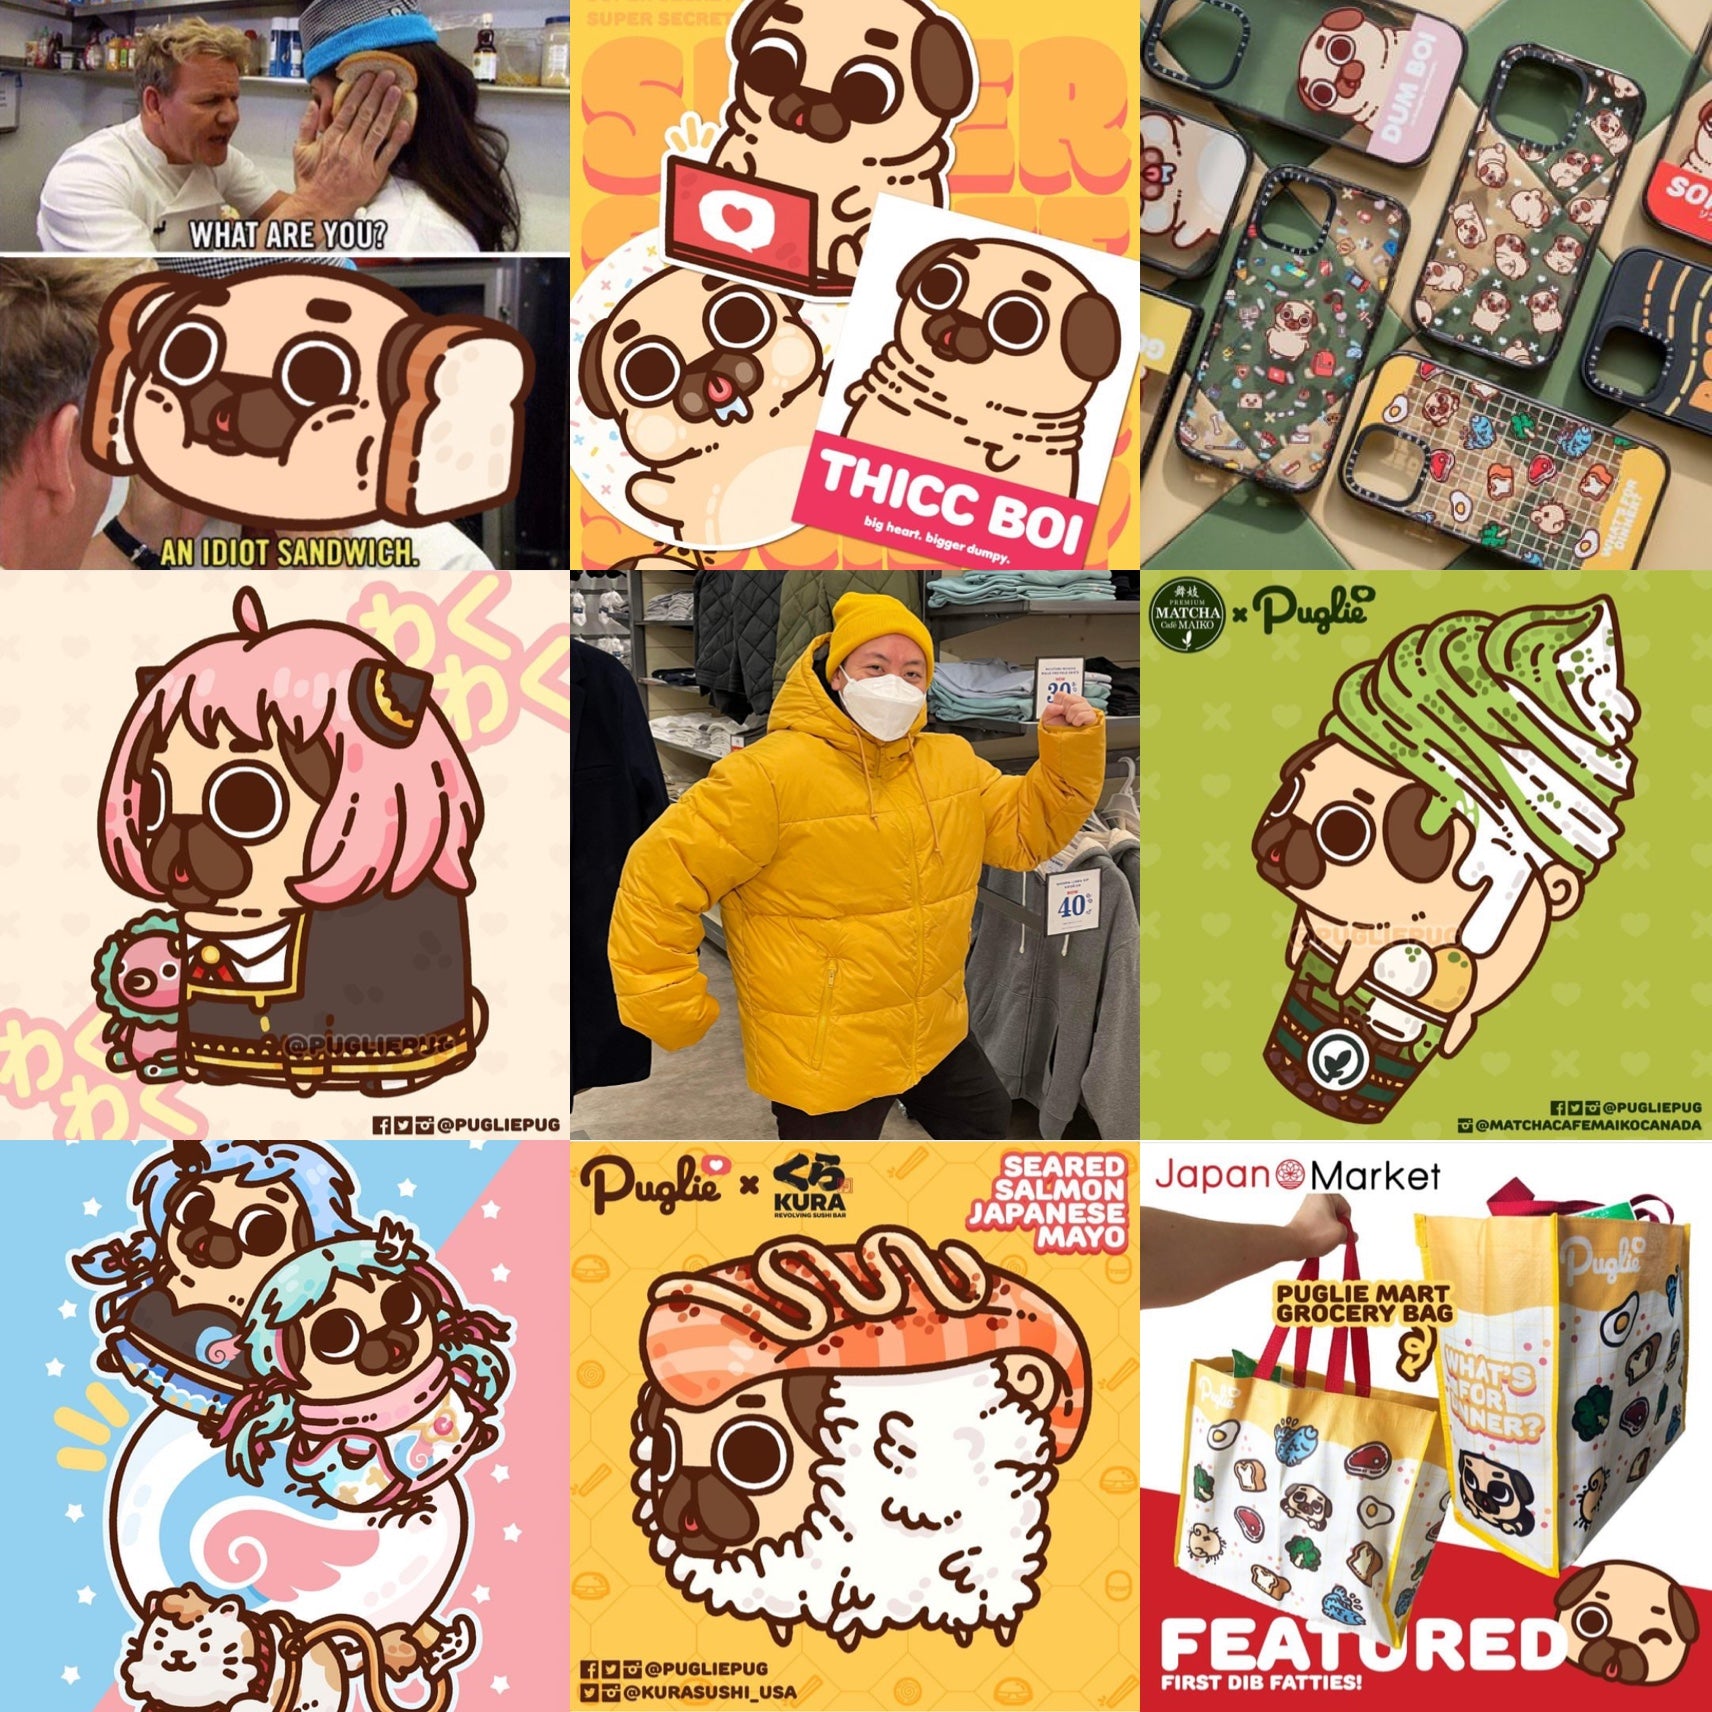 A square image made up of 9 pictures.  Top left is the Gordon Ramsay Idiot Sandwich meme, but instead of the female chef's face, it is Puglie squished between two slices of bread.  Top middle is a Puglie Sticker Society post featuring Puglie on a laptop, "Thicc Boi" Puglie, and Puglie Lickie circle sticker.  Top right is a collage of Puglie Casetify phone cases on a checkered green and yellow tile table.  Mid left is Puglie dressed as Anya from Spy x Family.  Middle is Euge, the artist, dressed in a yellow beanie and puffy yellow jacket doing a running-man pose.  Mid right is Puglie dressed up as a matcha and vanilla soft serve swirl parfait from Matcha Cafe Maiko.  Bottom left is Puglie dressed up as Otafest's mascots Seph and Aurora on a Japanese yoyo-balloon. Bottom middle is Puglie dressed up as a seared salmon japanese mayo sushi from Kura Sushi. Bottom right is a featured post for Japan Market that showcases the Puglie Mart Grocery Bag.